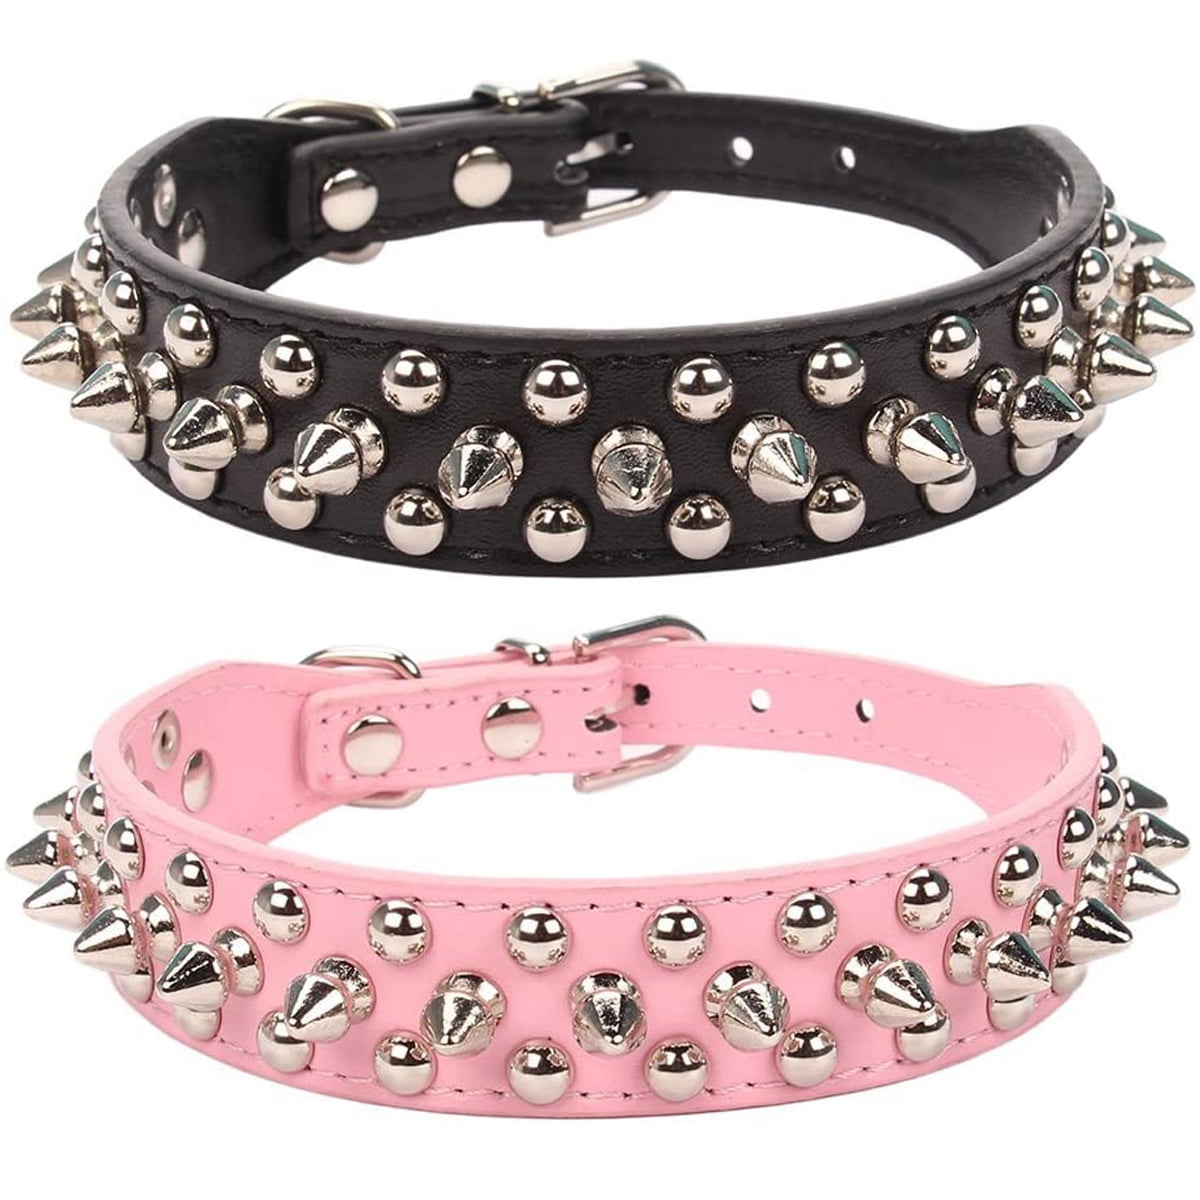 Cool Pet Collars,10 Pcs Soft Faux Leather Spiked Dog Collar with Rivets and Studs Puppy Collars Adjustable for Small Medium Large Dogs for Pet Big